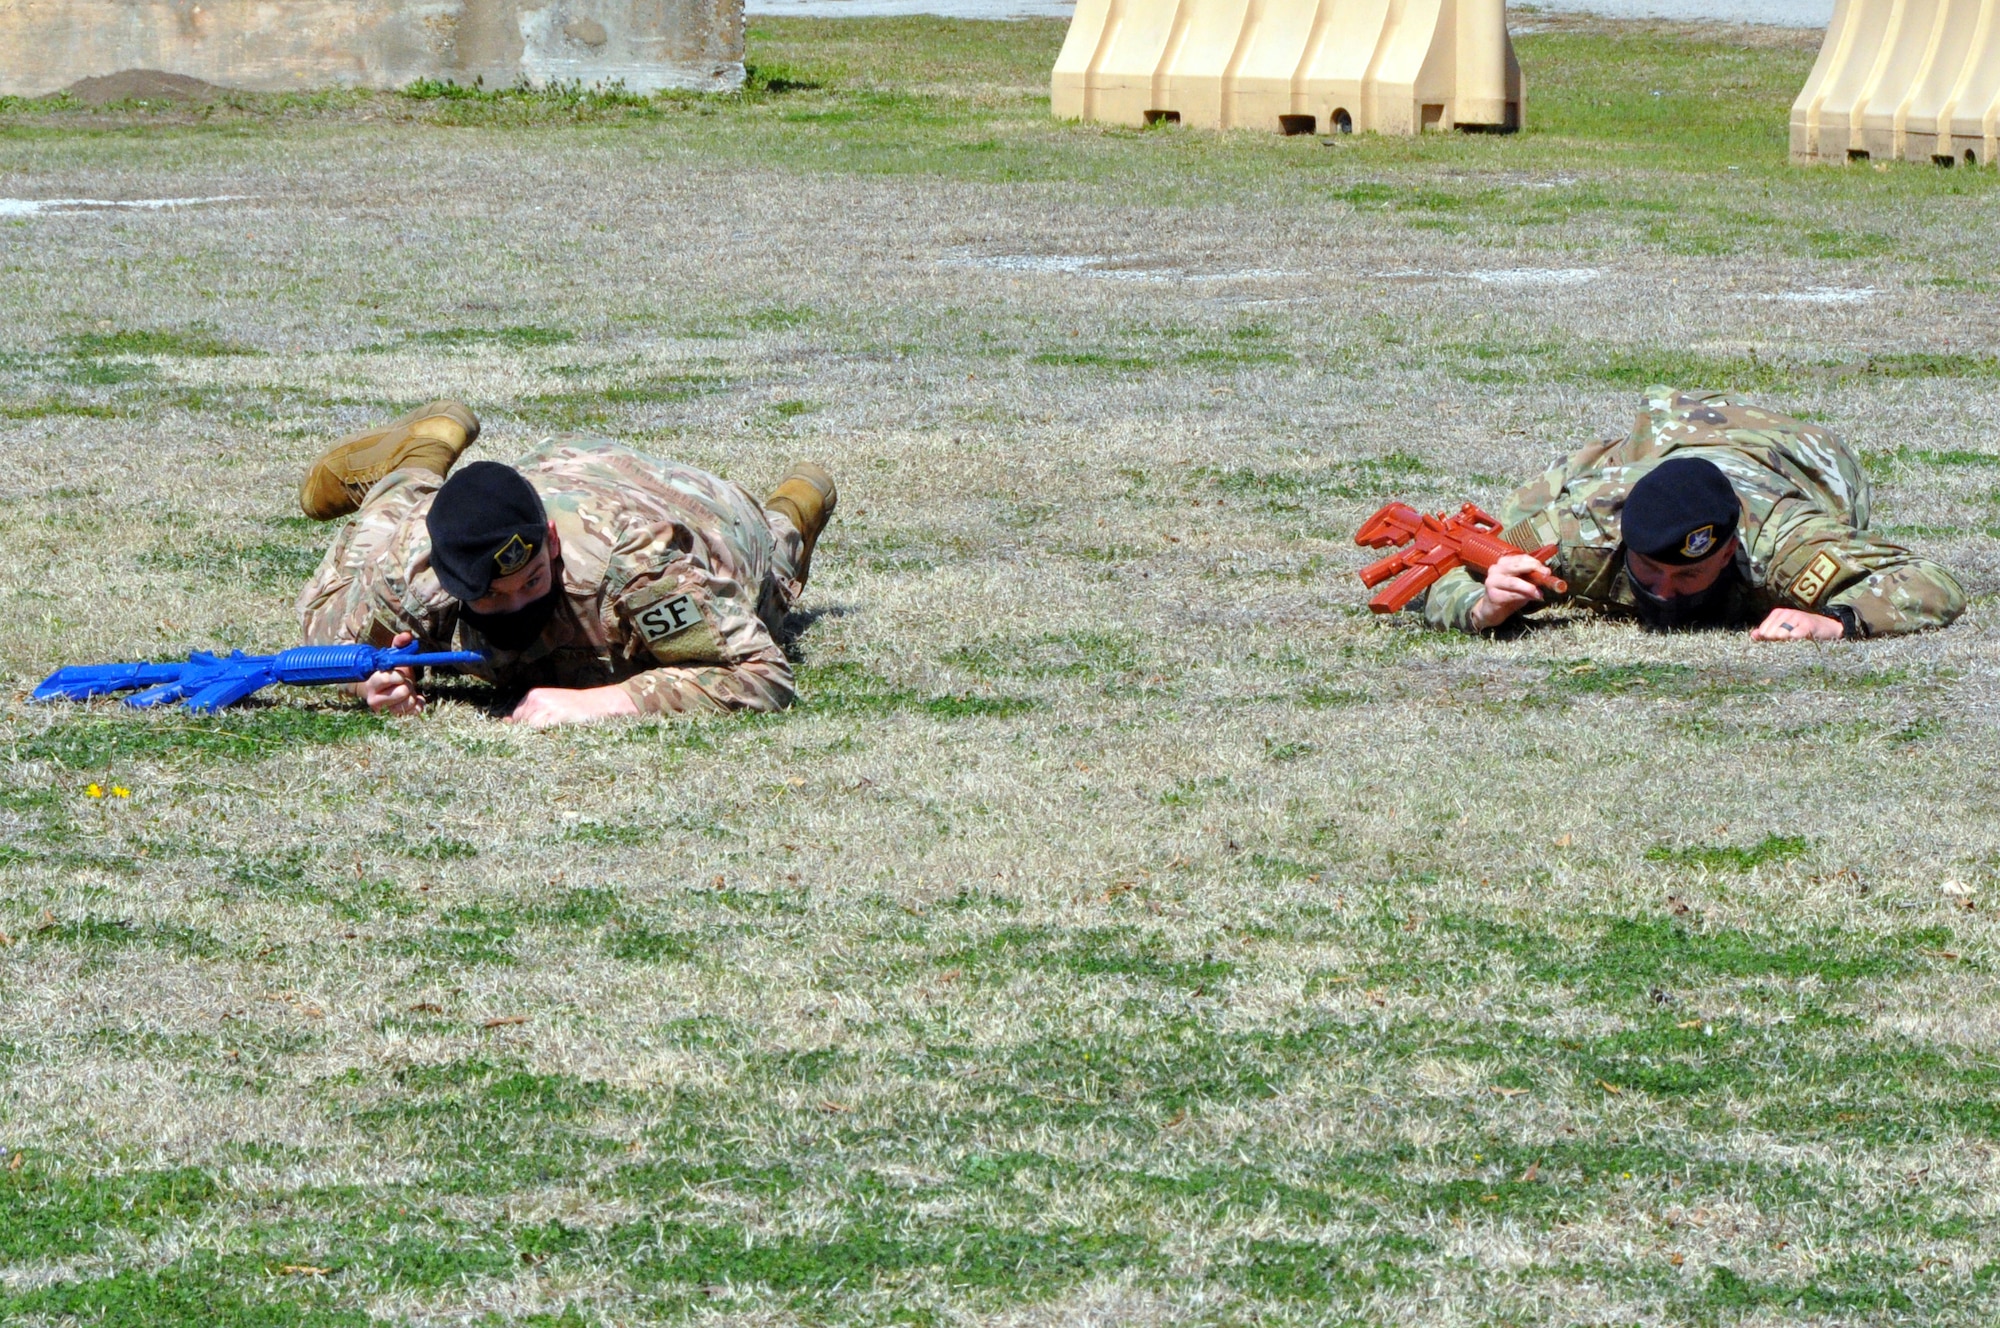 301st Fighter Wing Security Forces Squadron fire team members, (Left) Staff Sgt. Timothy Hobson and (right) Airman First Class Ryan Gomas low crawl as part of fire team movements during a field training exercise at U.S. Naval Air Station Joint Reserve Base Fort Worth, Texas on March 6, 2021. Repetitious maneuvers and team work creates a more cohesive training environment, ensuring when the time comes for them to protect, defend and fight. (U.S. Air Force photo by Senior Airman William Downs)